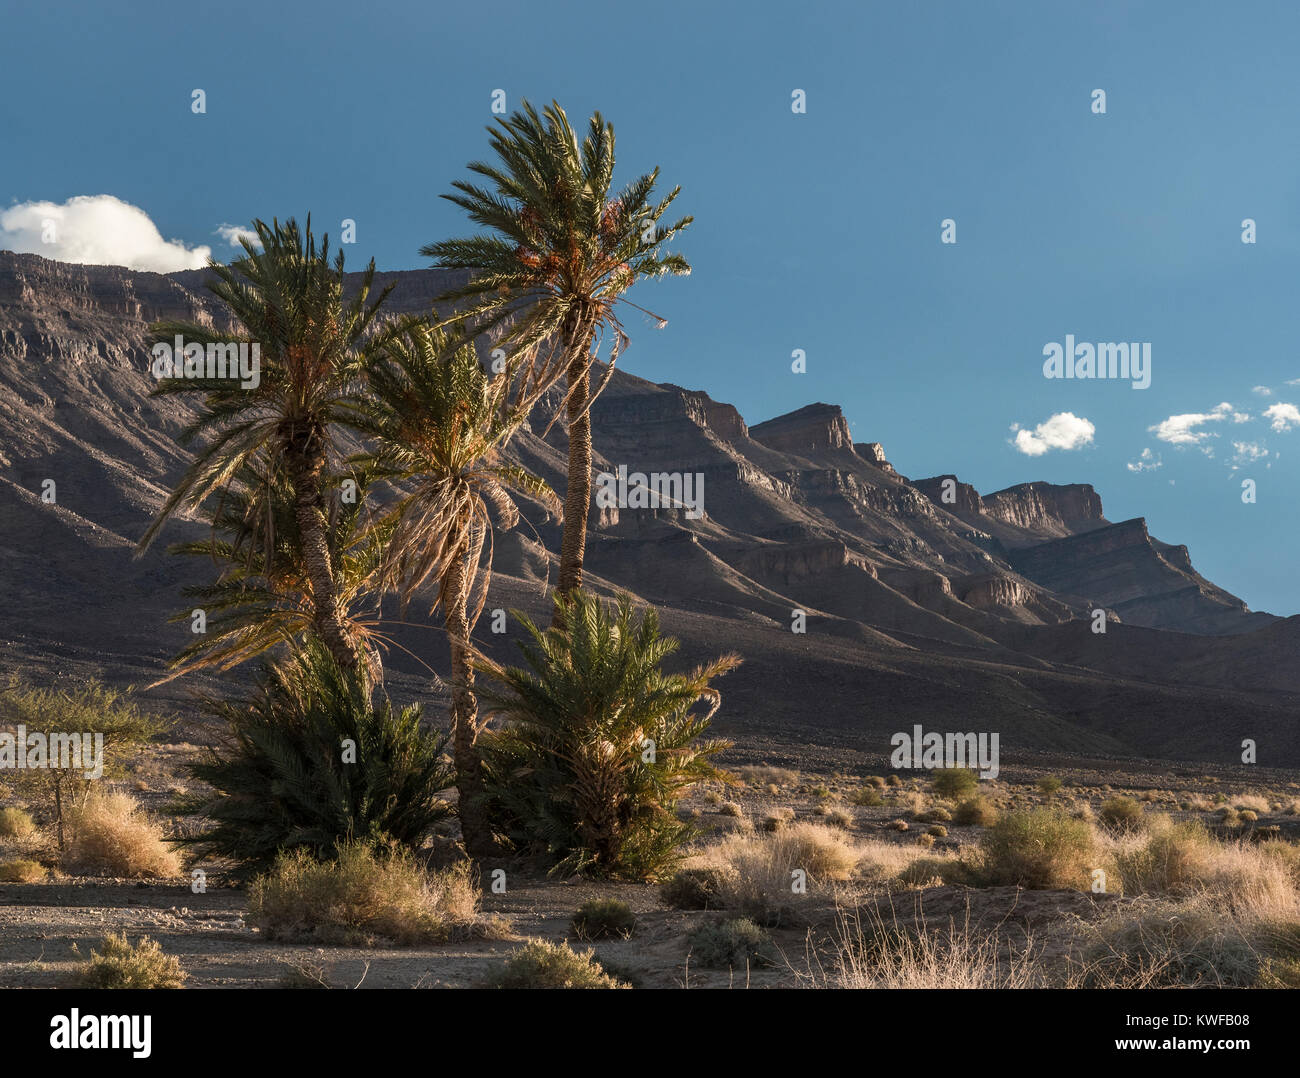 Moroccan landscape image with trees and rugged topography. Stock Photo